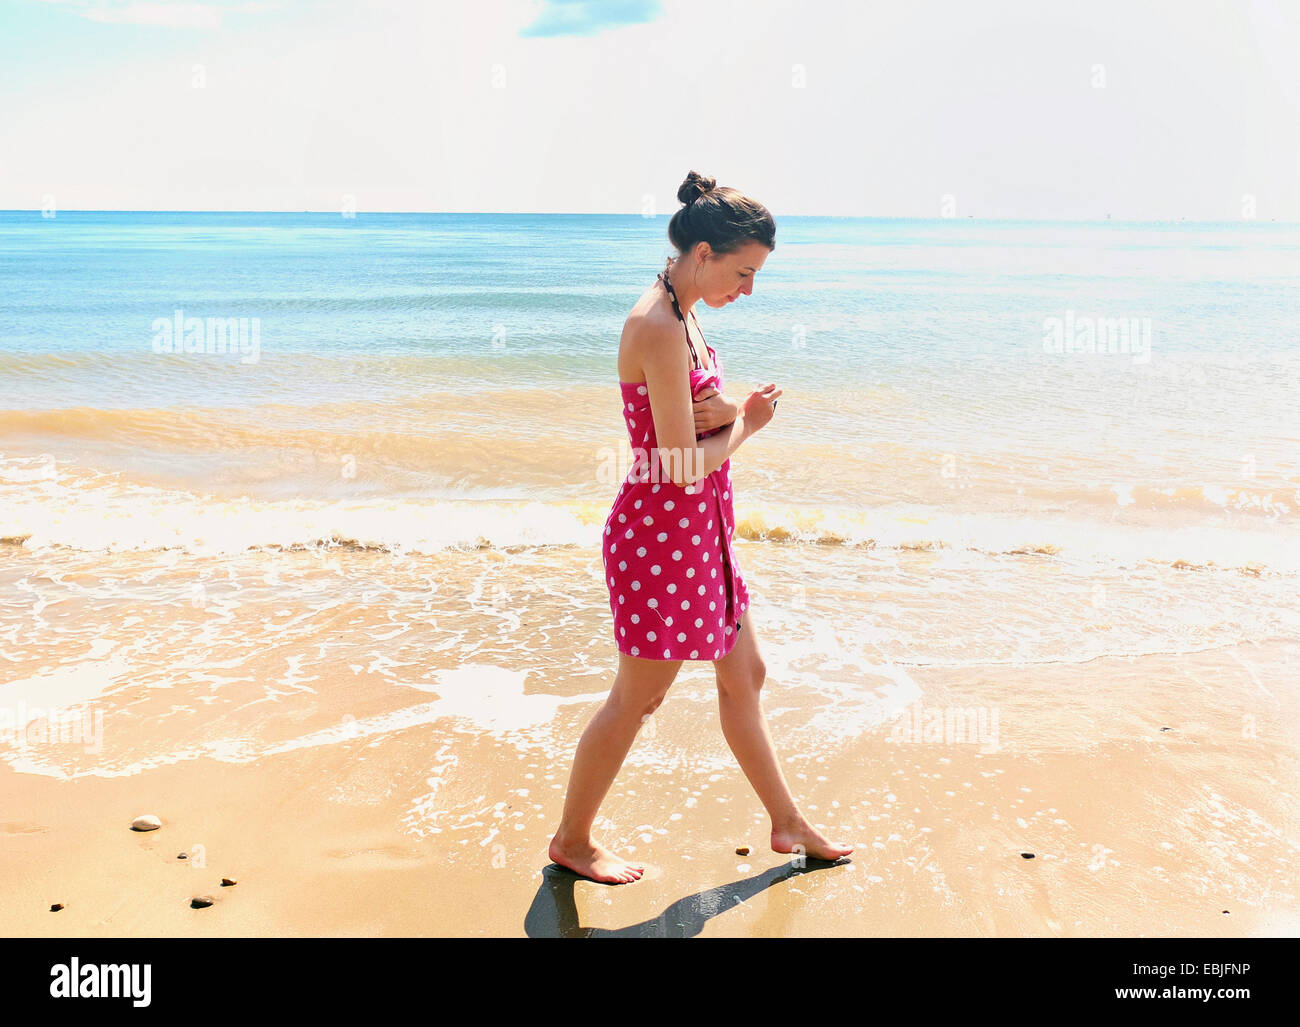 Young woman walking on beach Banque D'Images